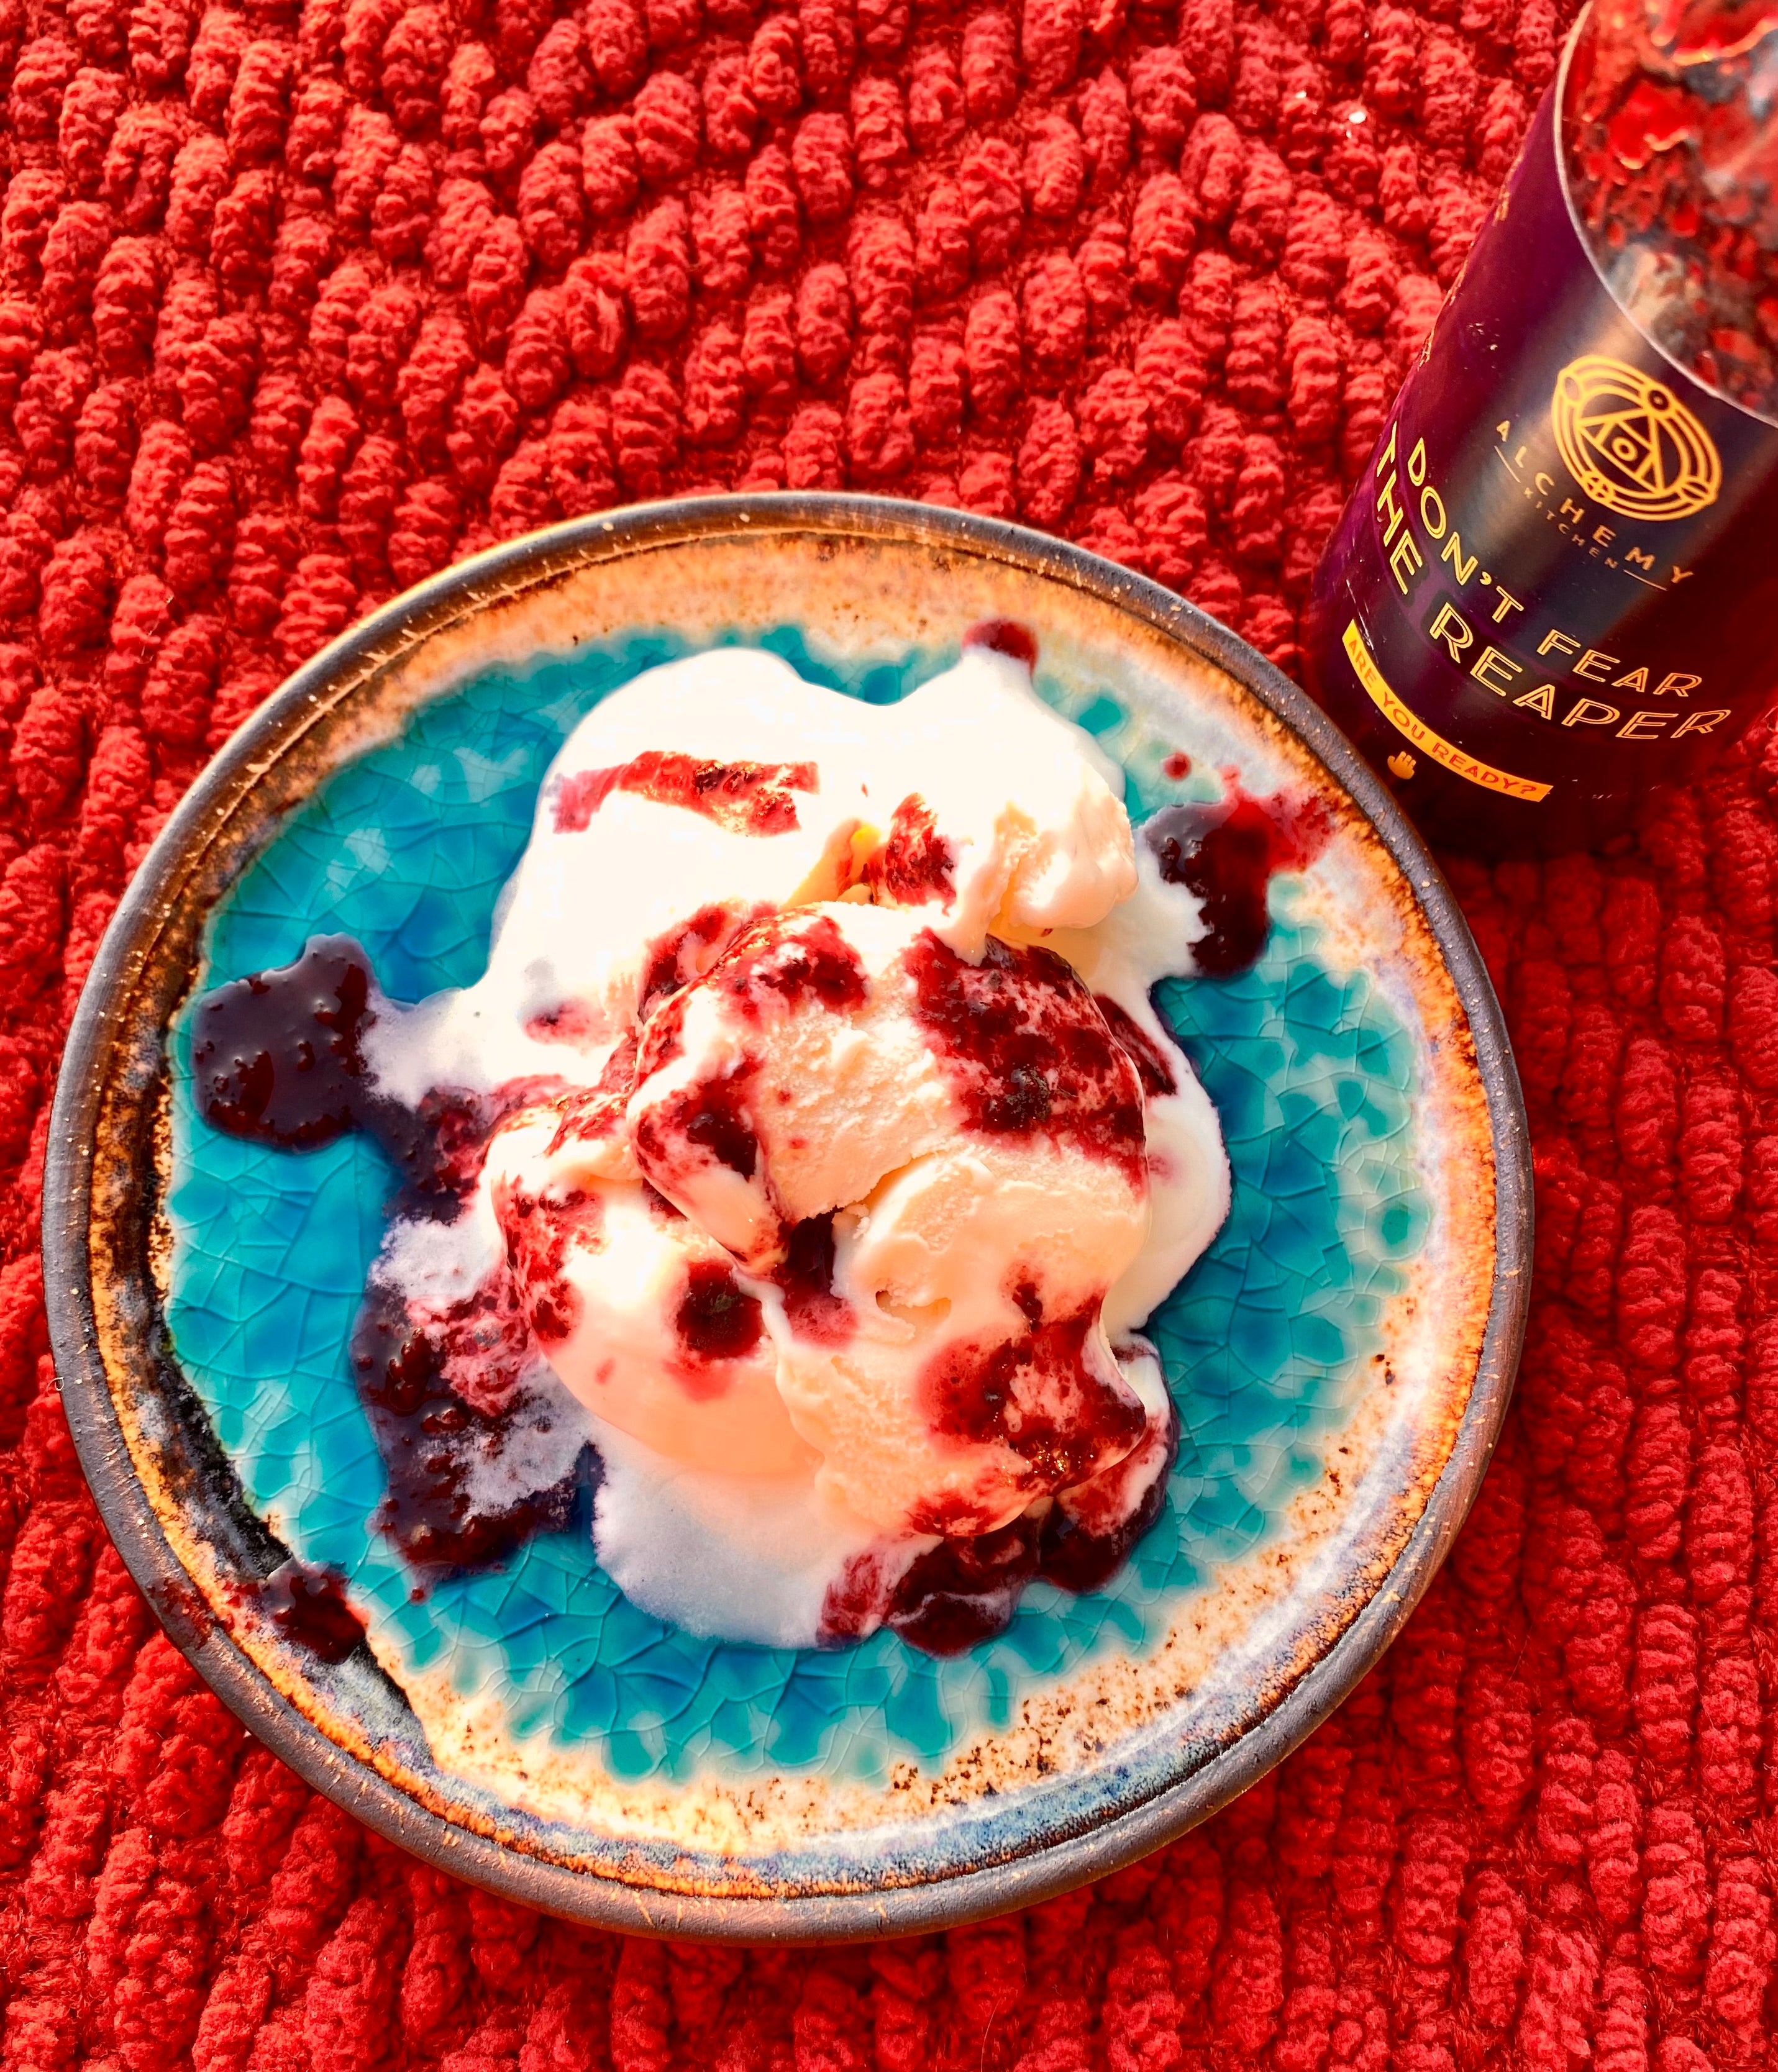 Blueberry cake and ice cream with Alchemy Kitchen Don't Fear the Reaper dessert hot sauce